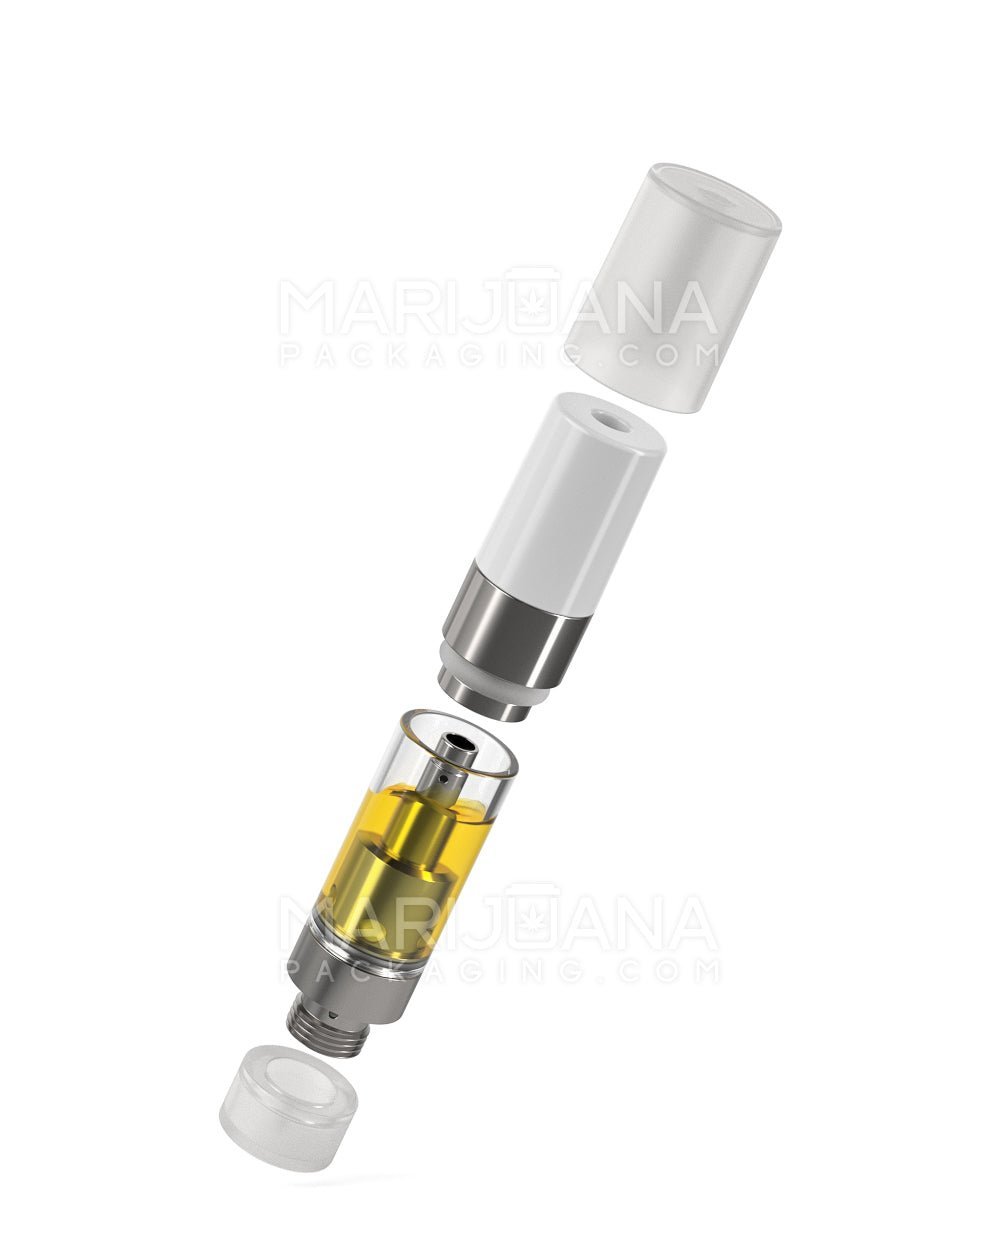 Ceramic Core Glass Vape Cartridge with Round White Plastic Mouthpiece | 0.5mL - Press On - 100 Count - 8